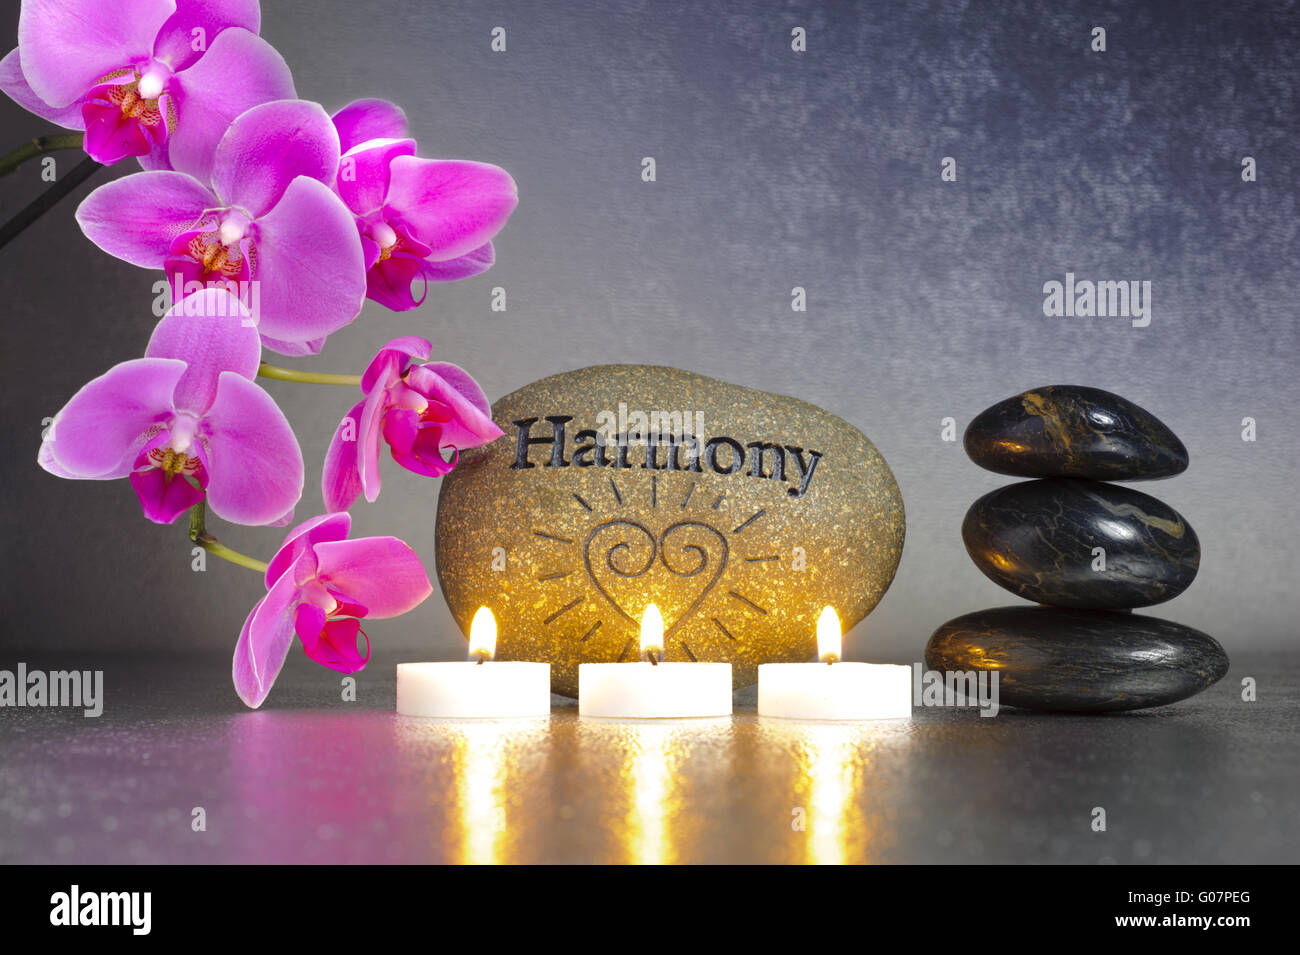 japanese zen garden with orchid and candle light Stock Photo